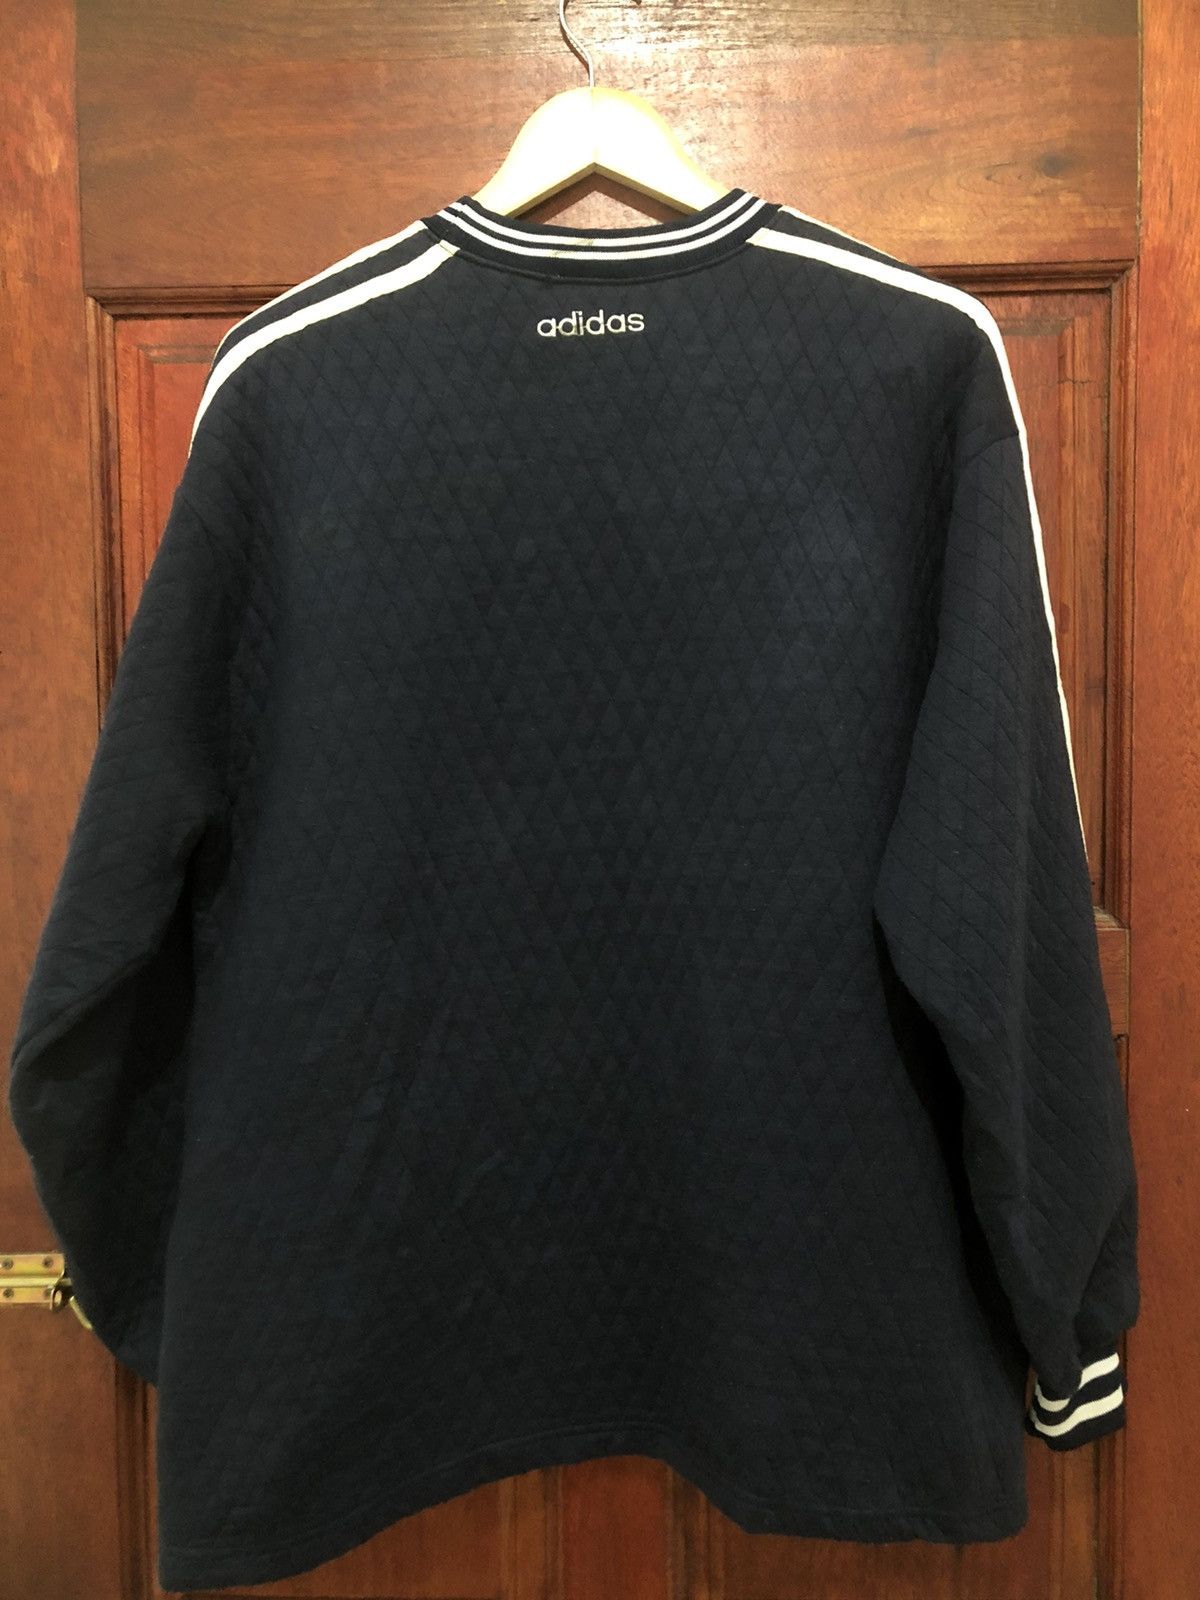 Vintage Adidas Quilted Embroidery Trefoil Sweatshirt - 2